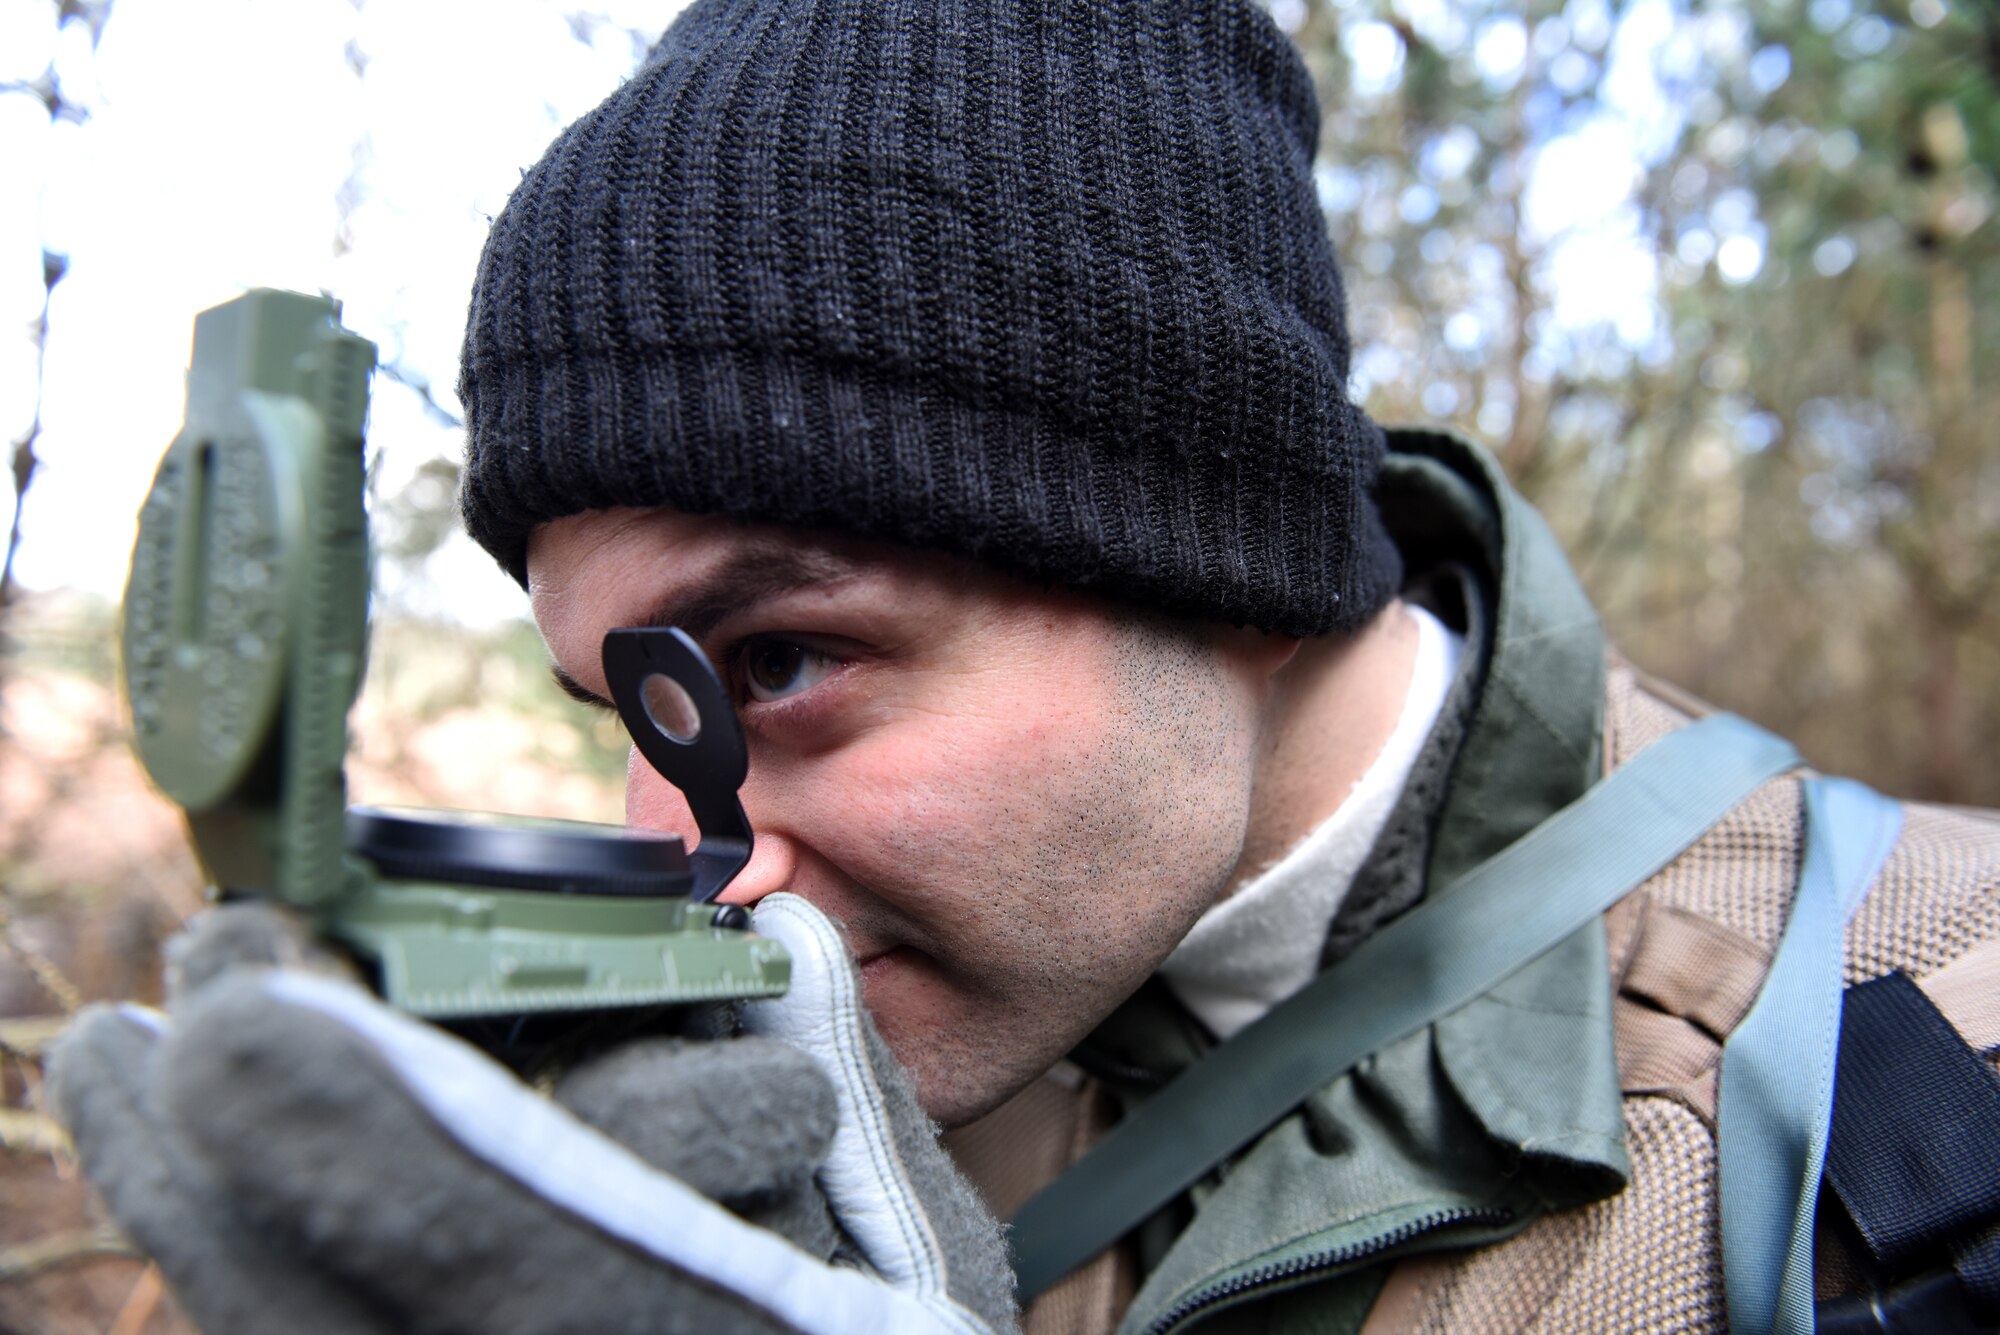 A 48th Fighter Wing Airman uses a compass during a Survival, Evasion, Resistance, and Escape training course at Stanford Training Area near Thetford, England, March 4, 2020. The training course teaches Airmen the skills needed to escape and evade behind enemy lines. (U.S. Air Force photo by Airman 1st Class Rhonda Smith)